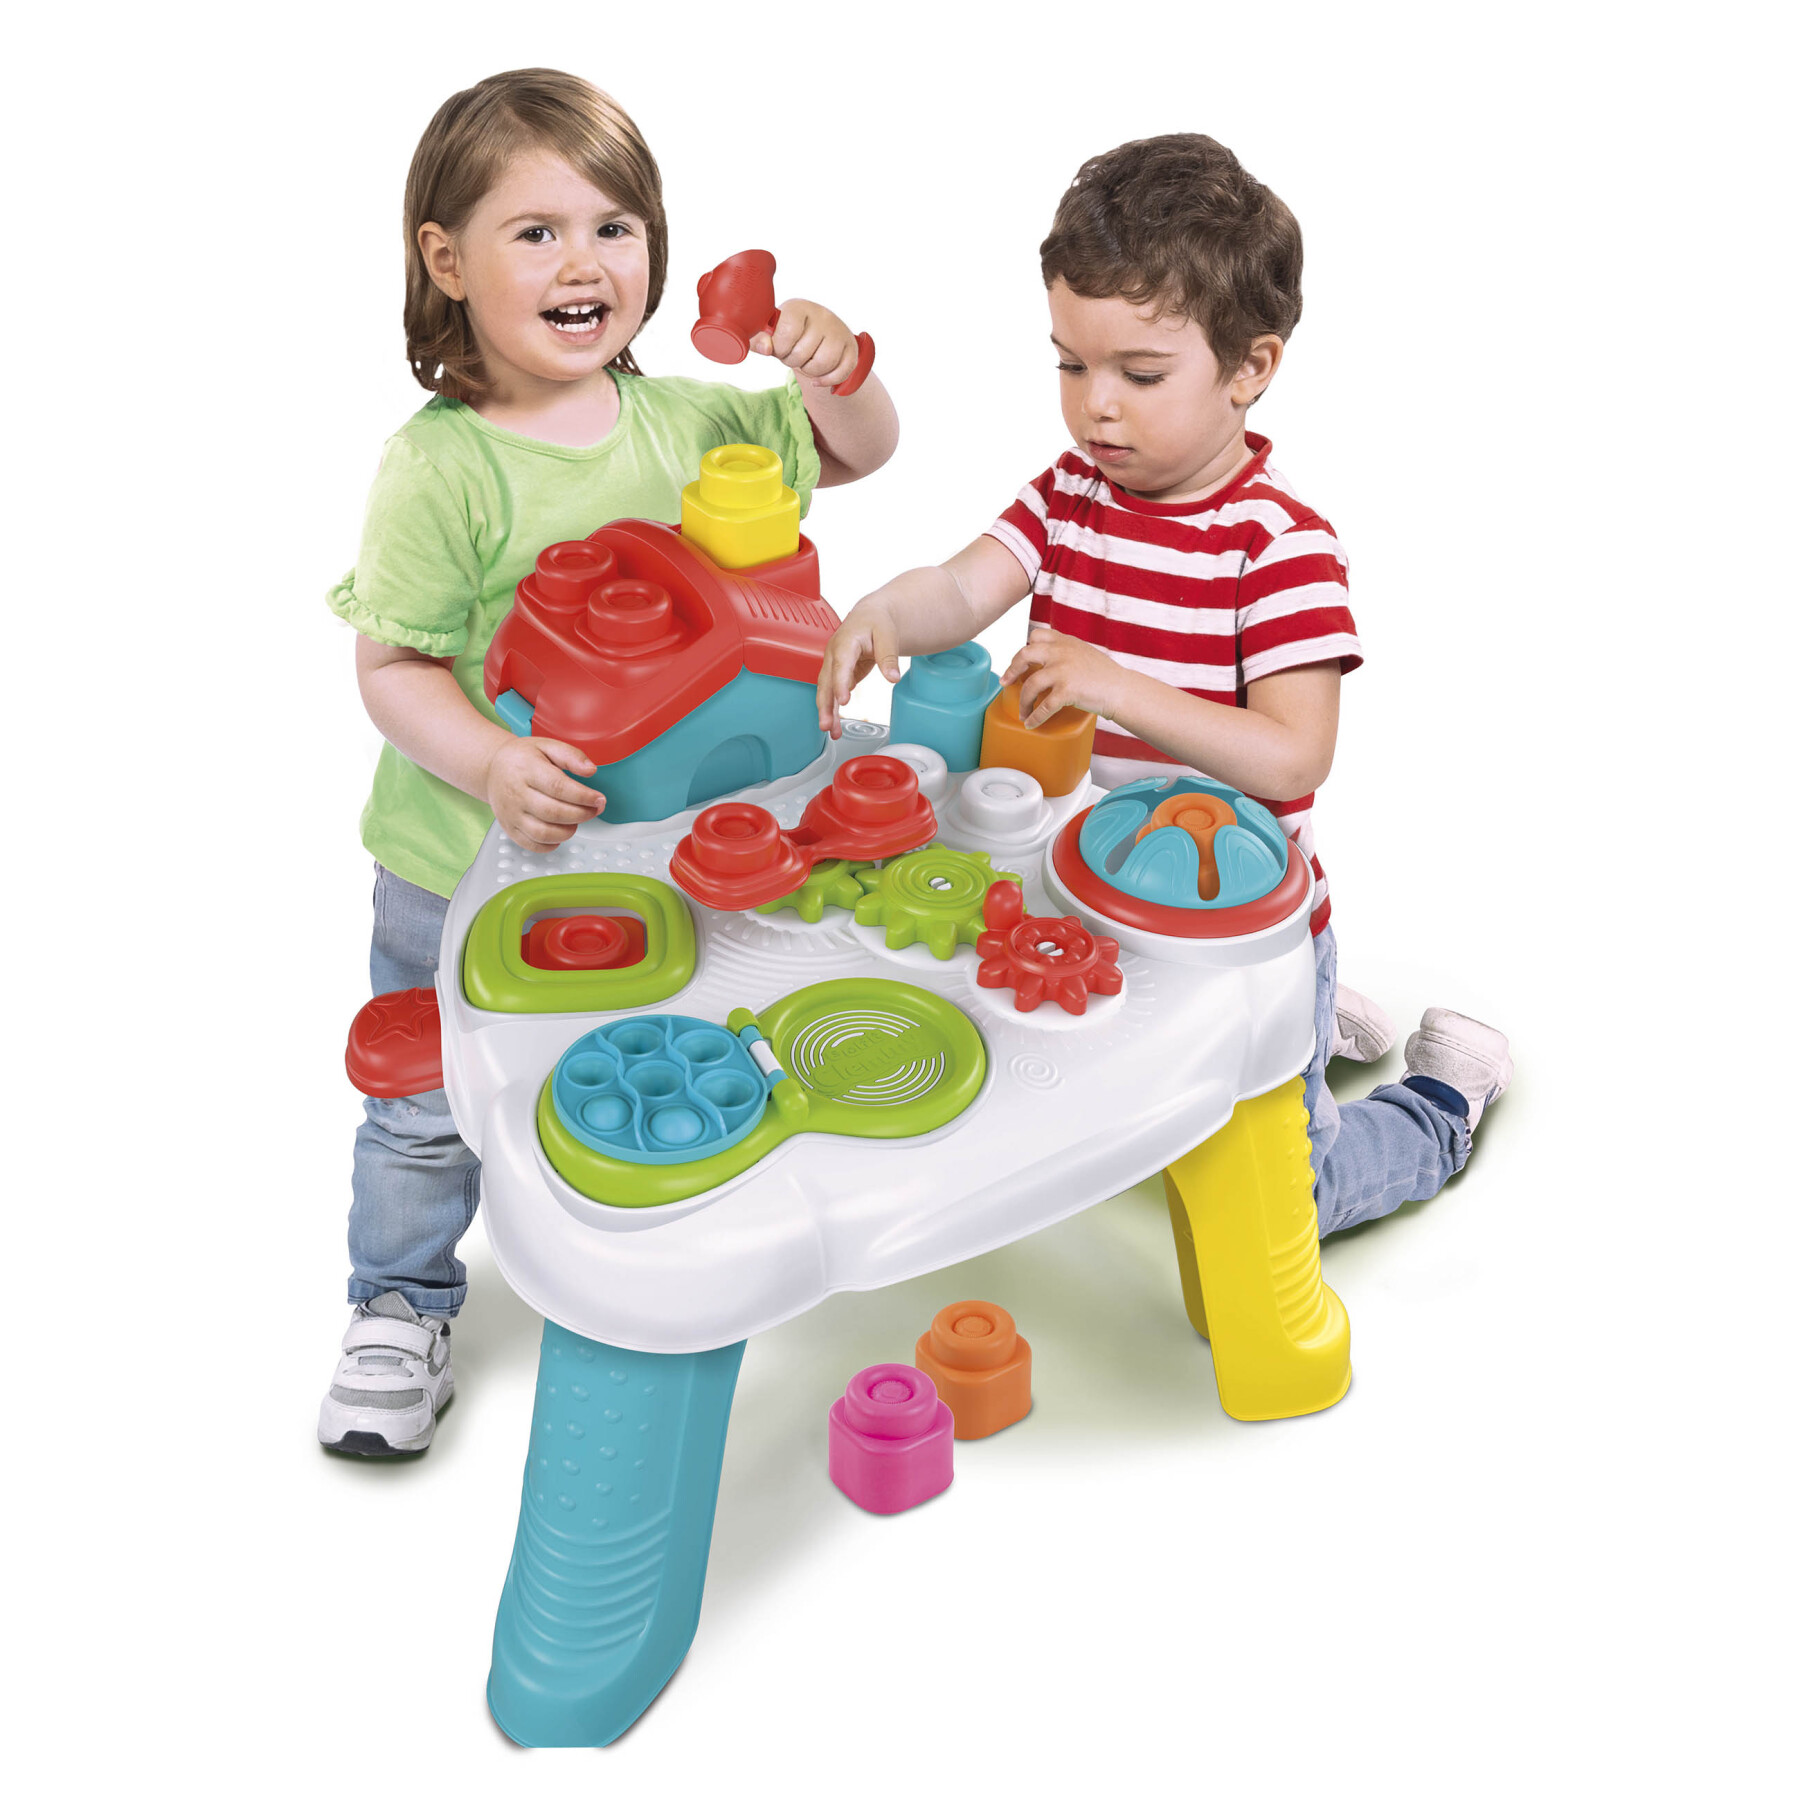 Clementoni - soft clemmy - touch, discover & play sensory table - CLEMMY